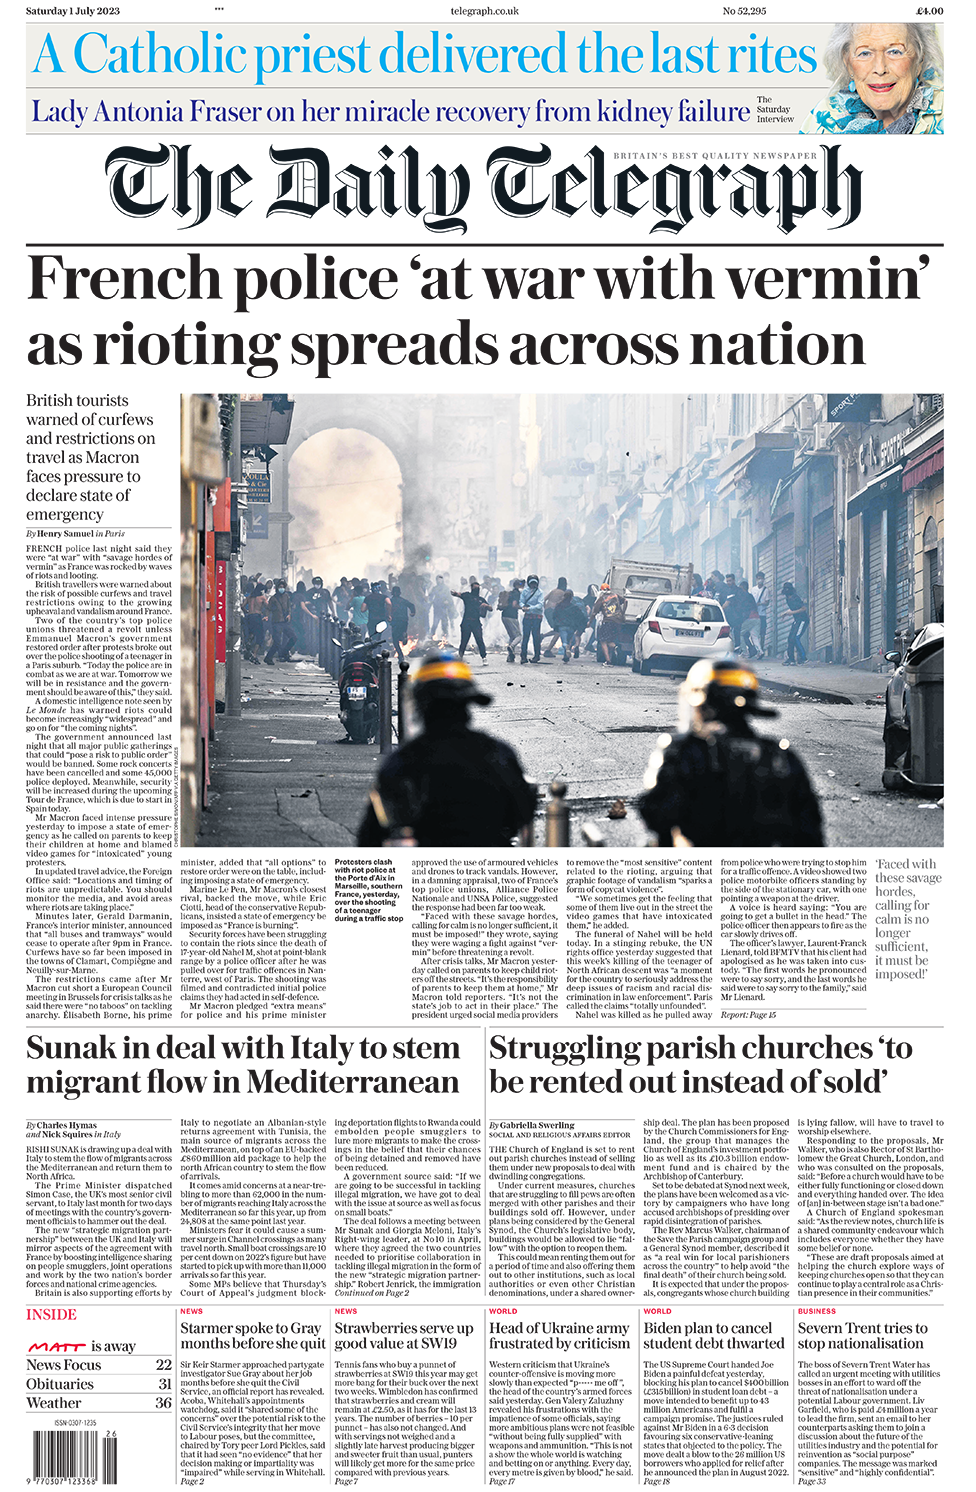 The headline in The Daily Telegraph reads: "French police 'at war with vermin' as rioting spreads across nation